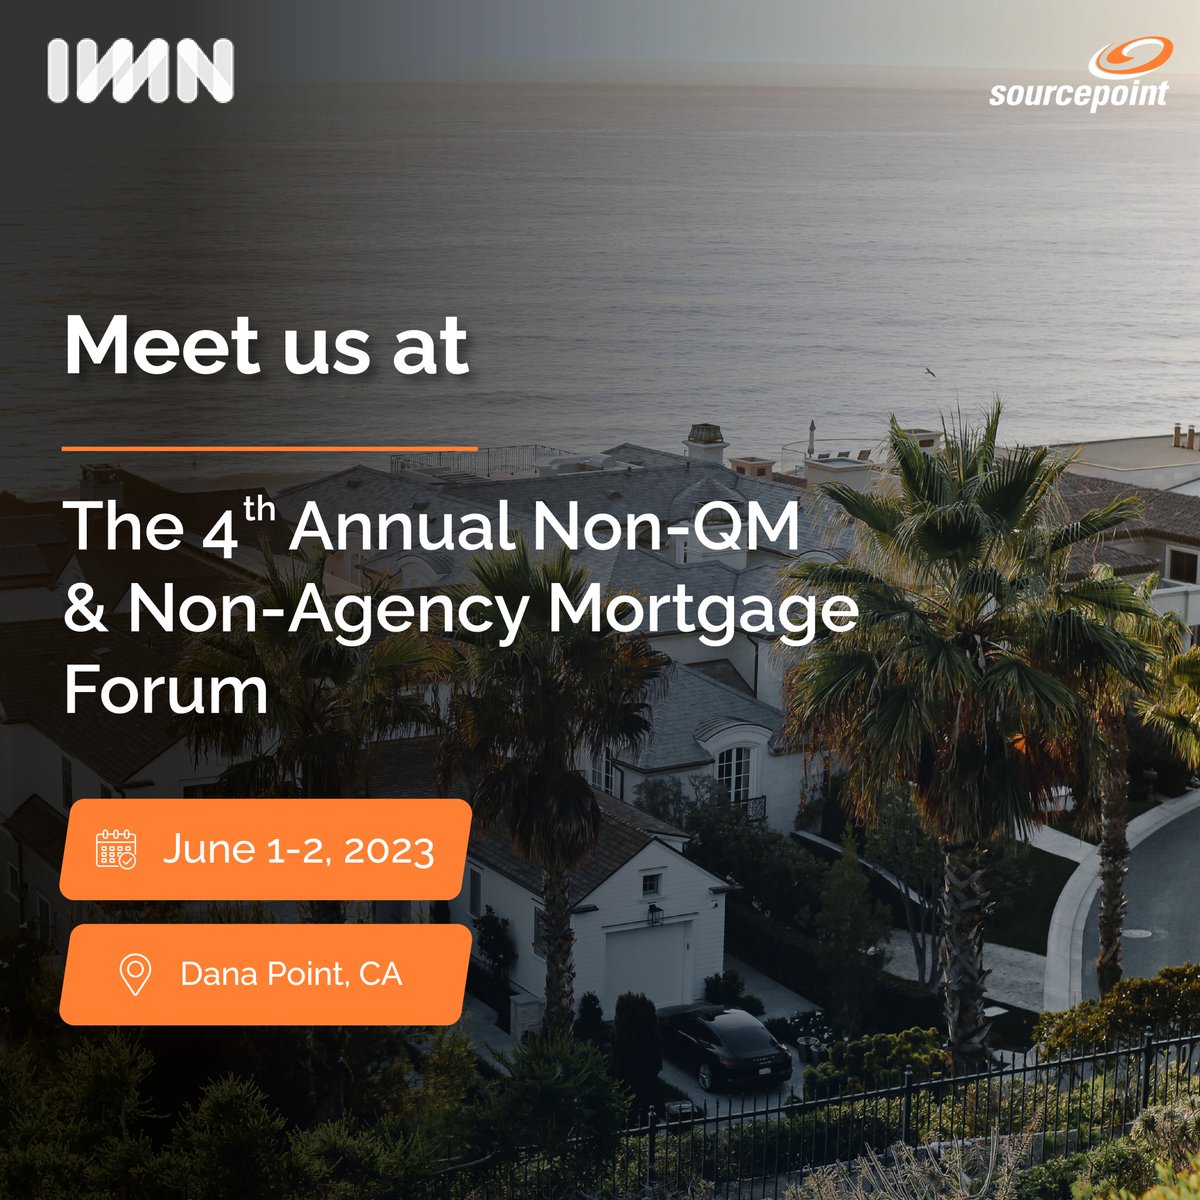 🔜 The 4th Annual Non-QM & Non-Agency Mortgage Forum is just around the corner.
📣Calling all attendees to connect with our experts to gain valuable insights 🗨️ into the leading #MortgageIndustry trends. 
Know more -> events.imn.org/event/bd77b11a…
#Mortgage #LoanOrigination